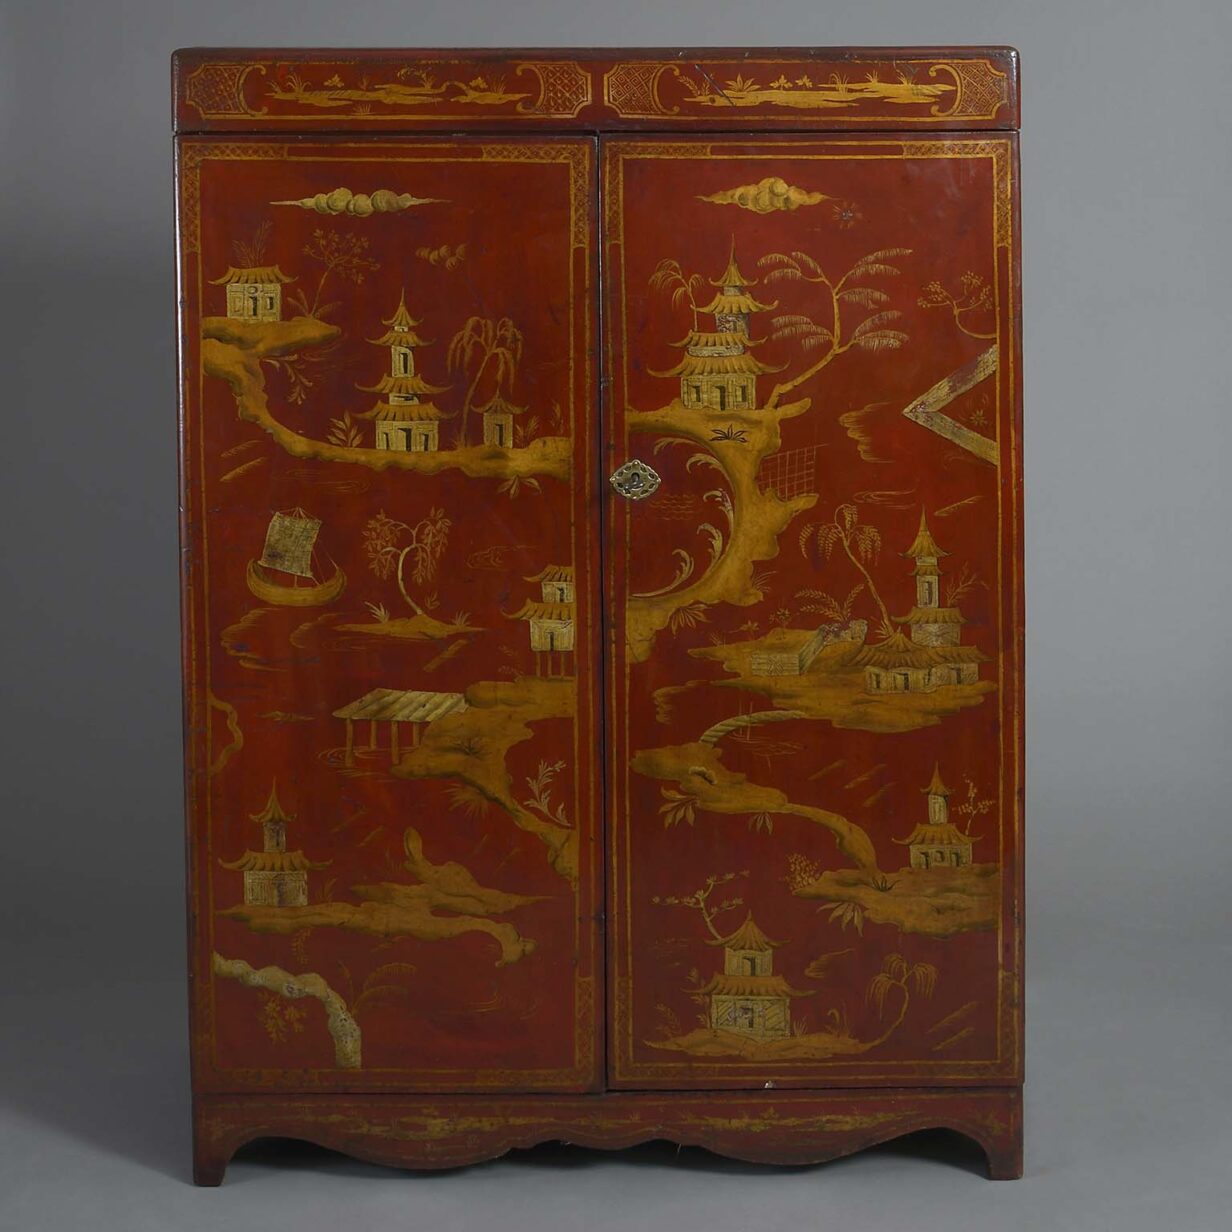 Mid-19th century red and gilt chinoiserie lacquer cabinet.